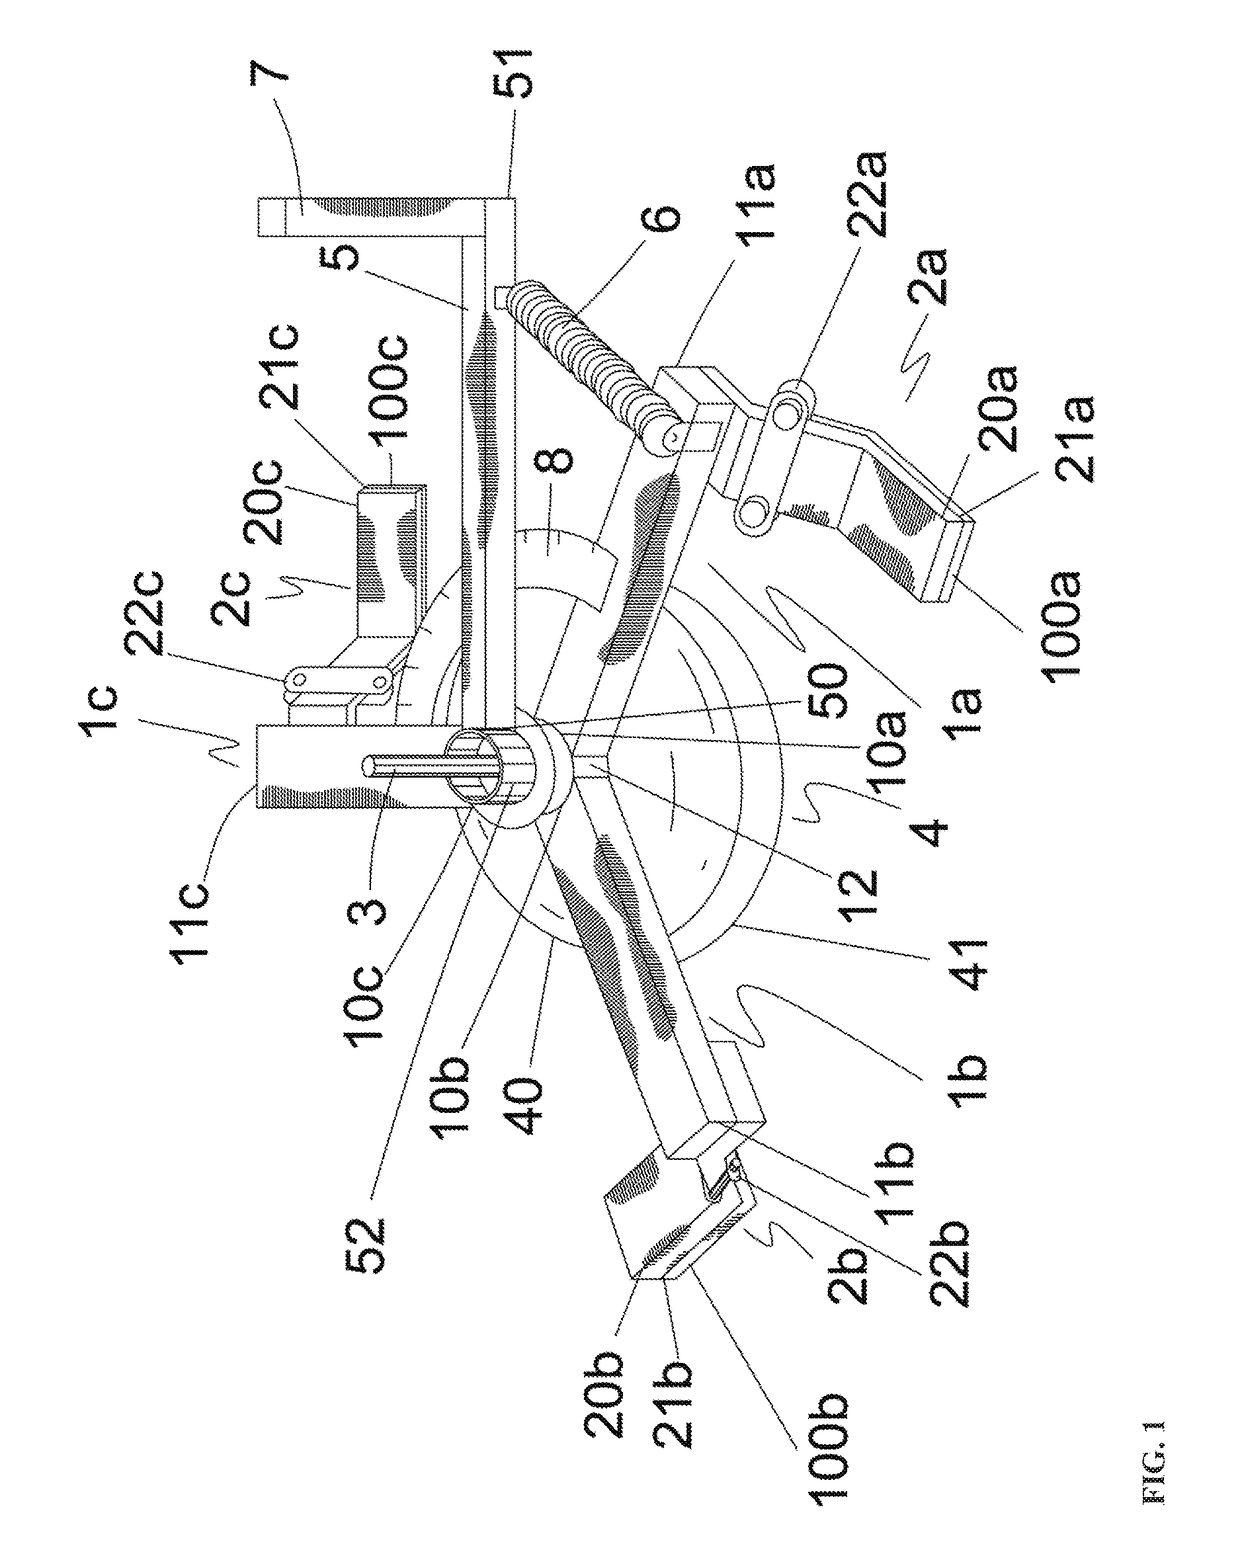 Device for measuring and comparing tire to pavement skid resistance